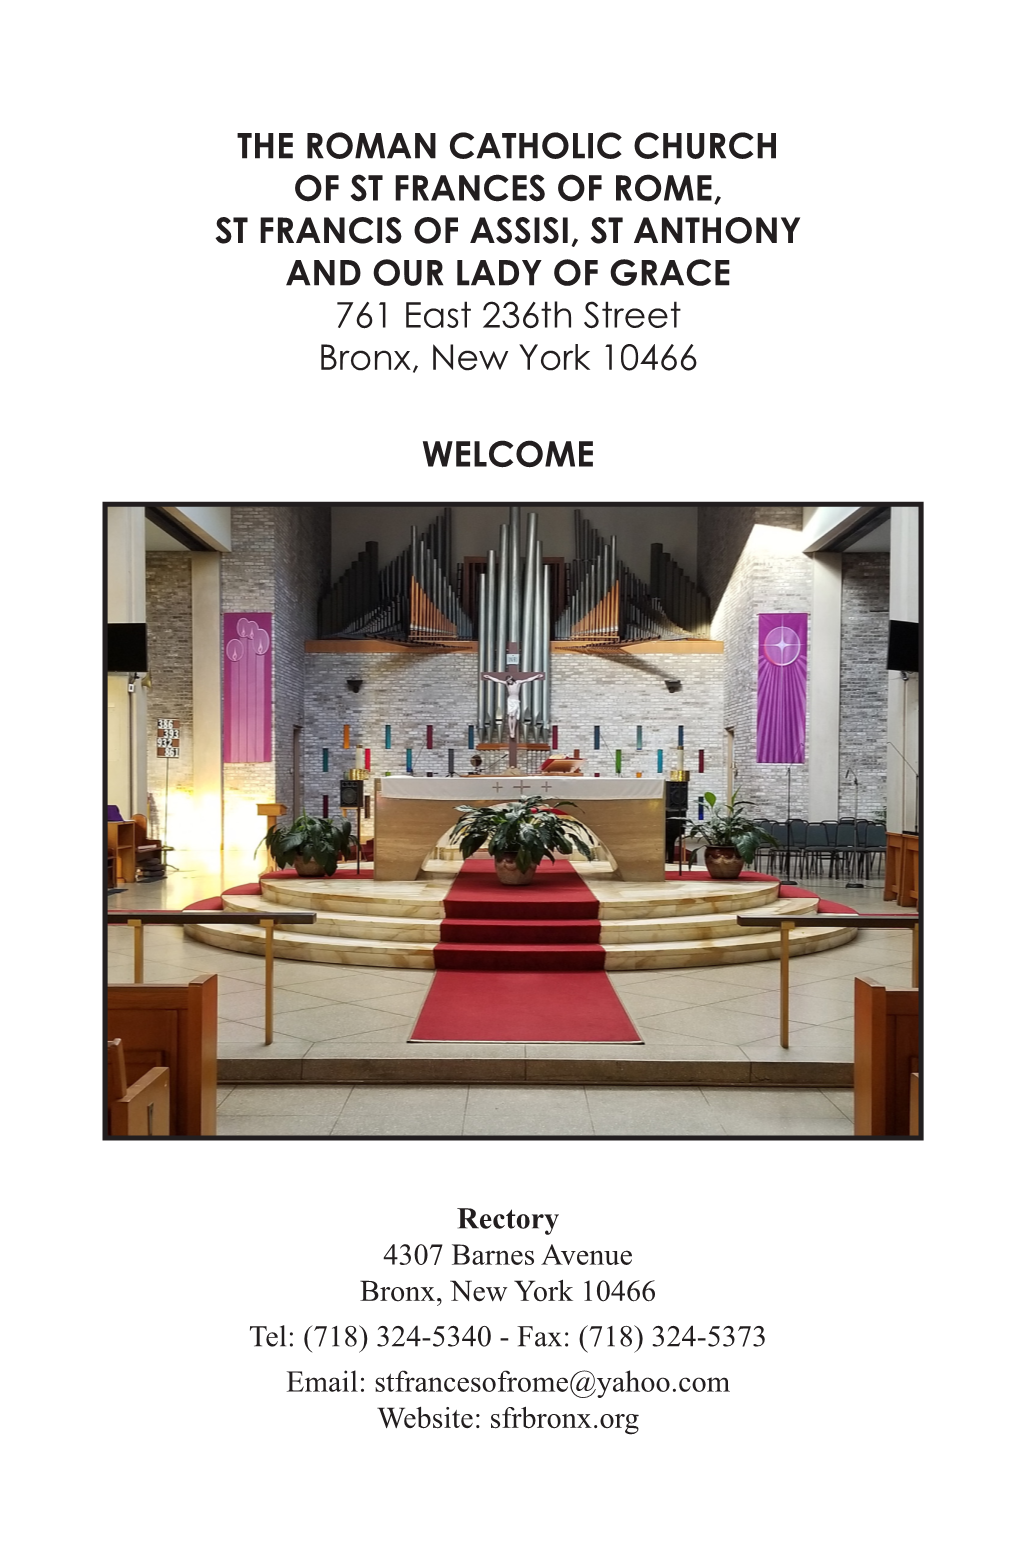 THE ROMAN CATHOLIC CHURCH of ST FRANCES of ROME, ST FRANCIS of ASSISI, ST ANTHONY and OUR LADY of GRACE 761 East 236Th Street Bronx, New York 10466